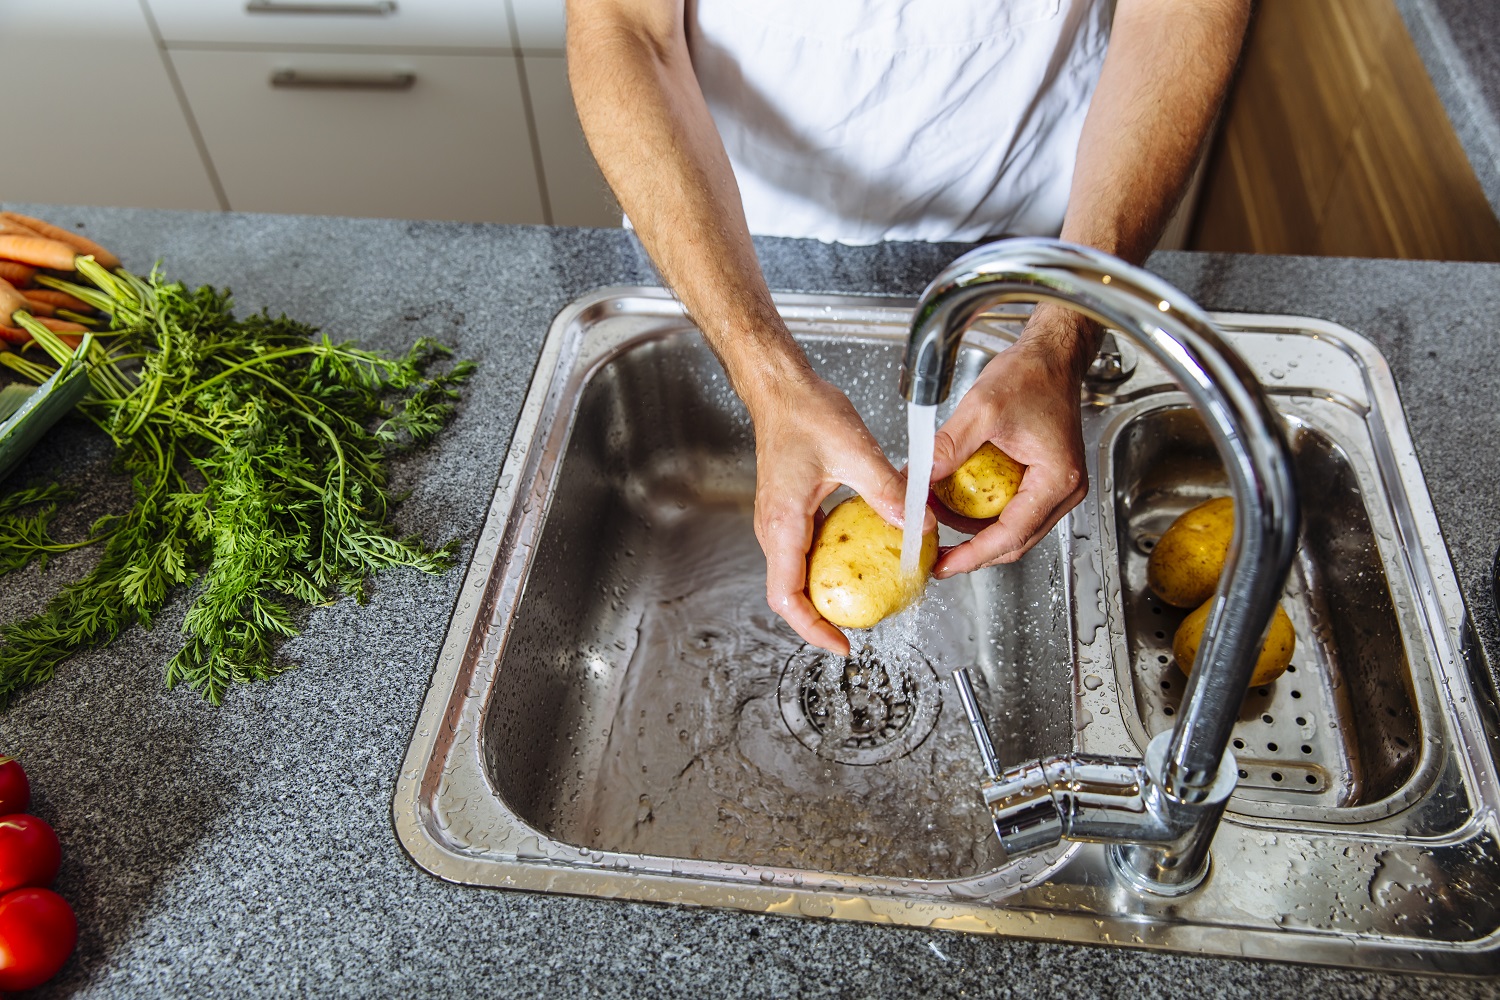 How to Maintain Your Garbage Disposal